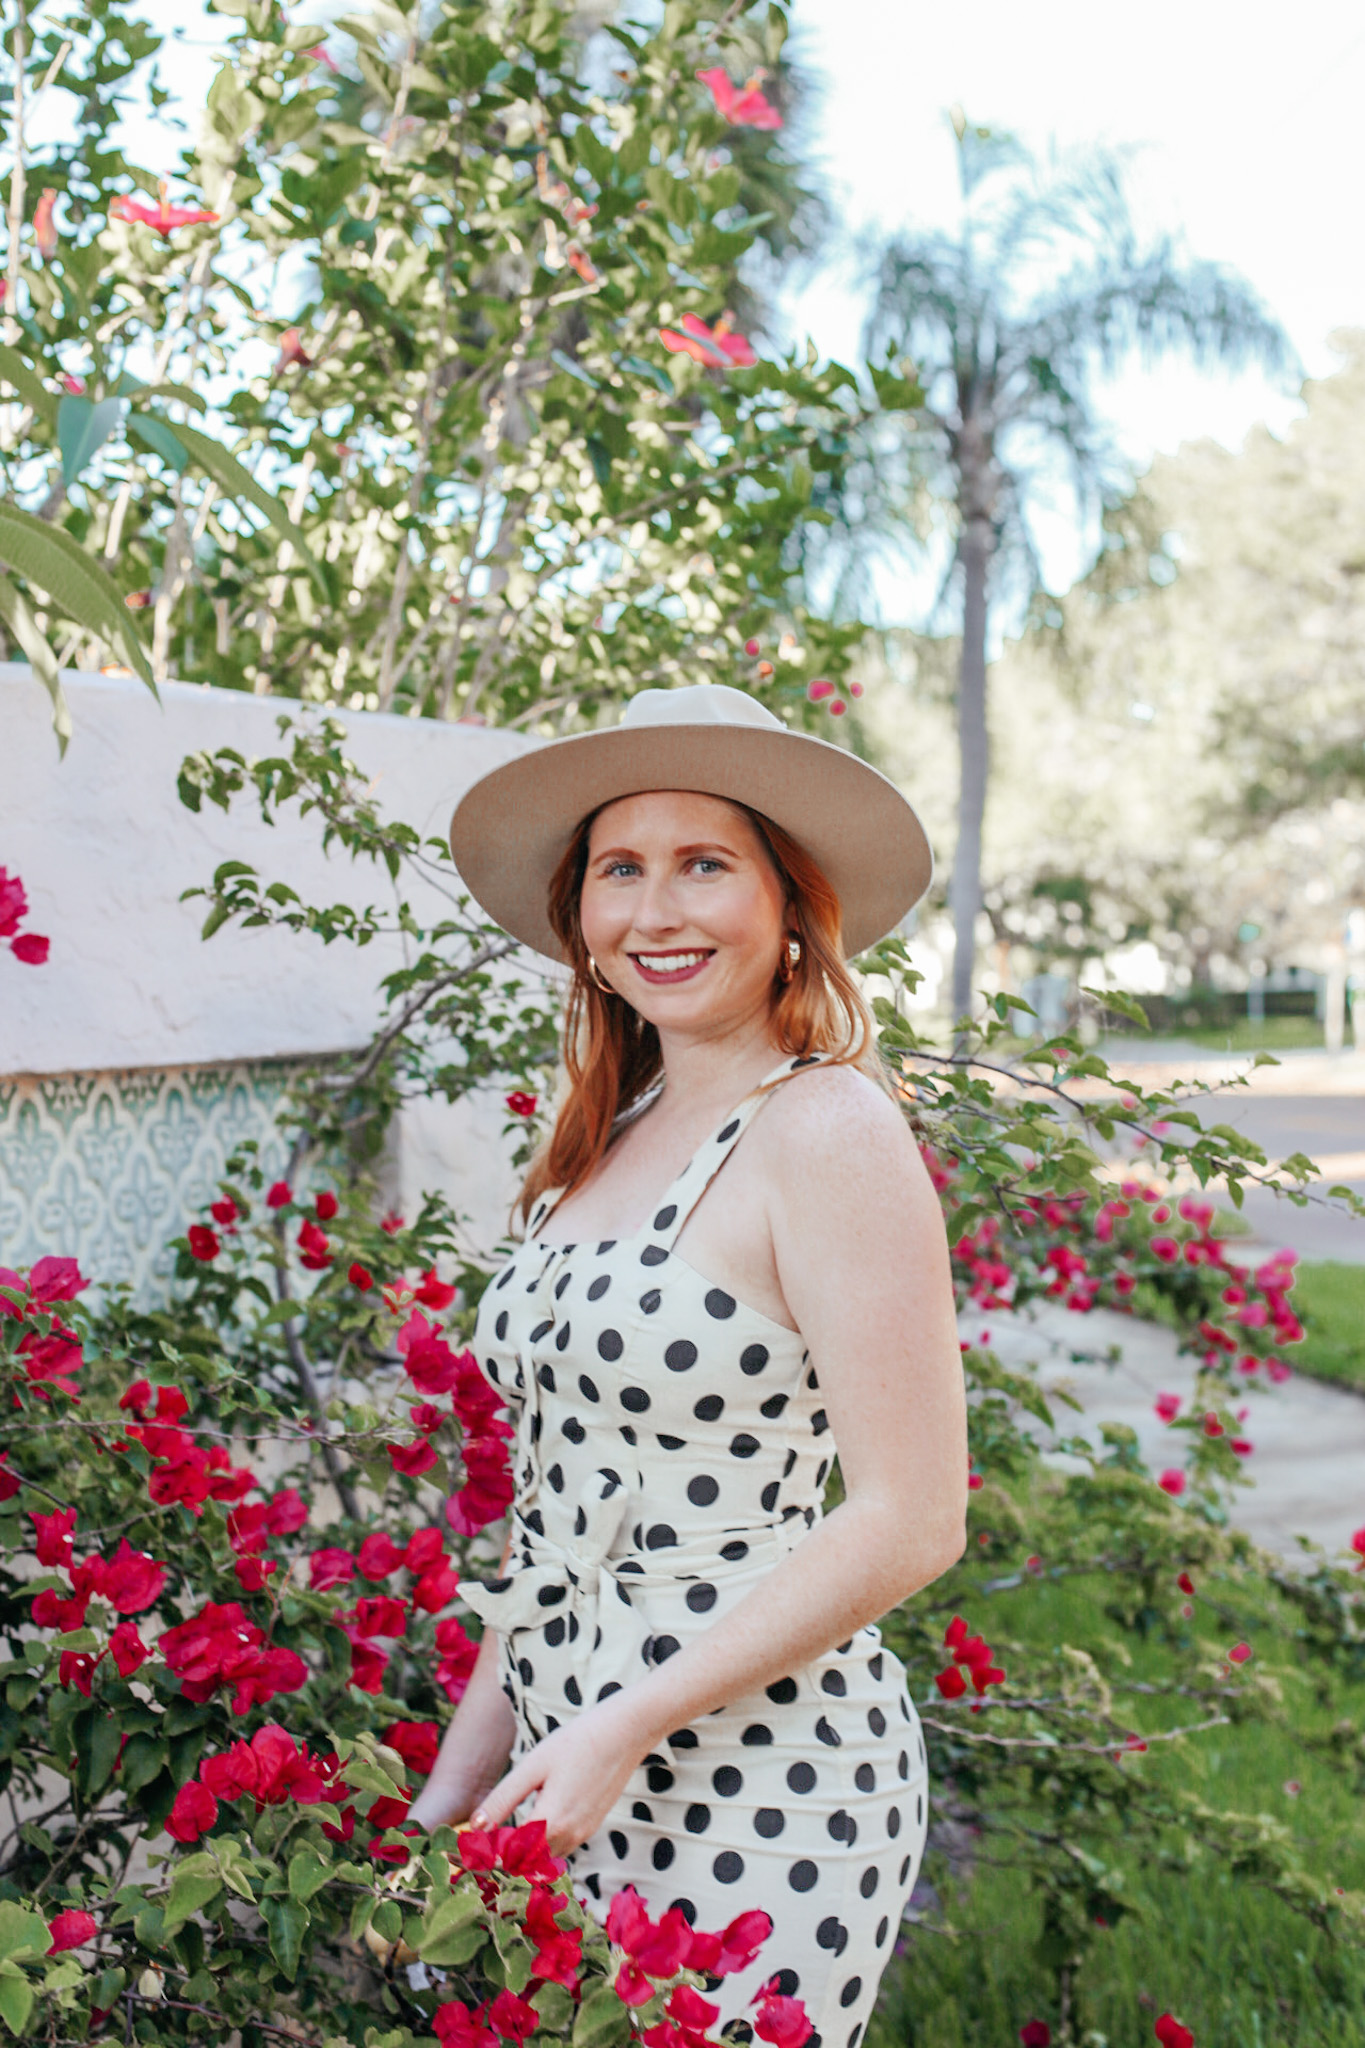 A Budget-Friendly Everyday Dress. Florida style blogger Amanda Burrows of the fashion blog Affordable by Amanda shares her favorite Spring Dresses Under $50. Amanda wears a casual JustFab Belted Button Front Dress with polka dot print. She is in St. Petersburg, Florida. 